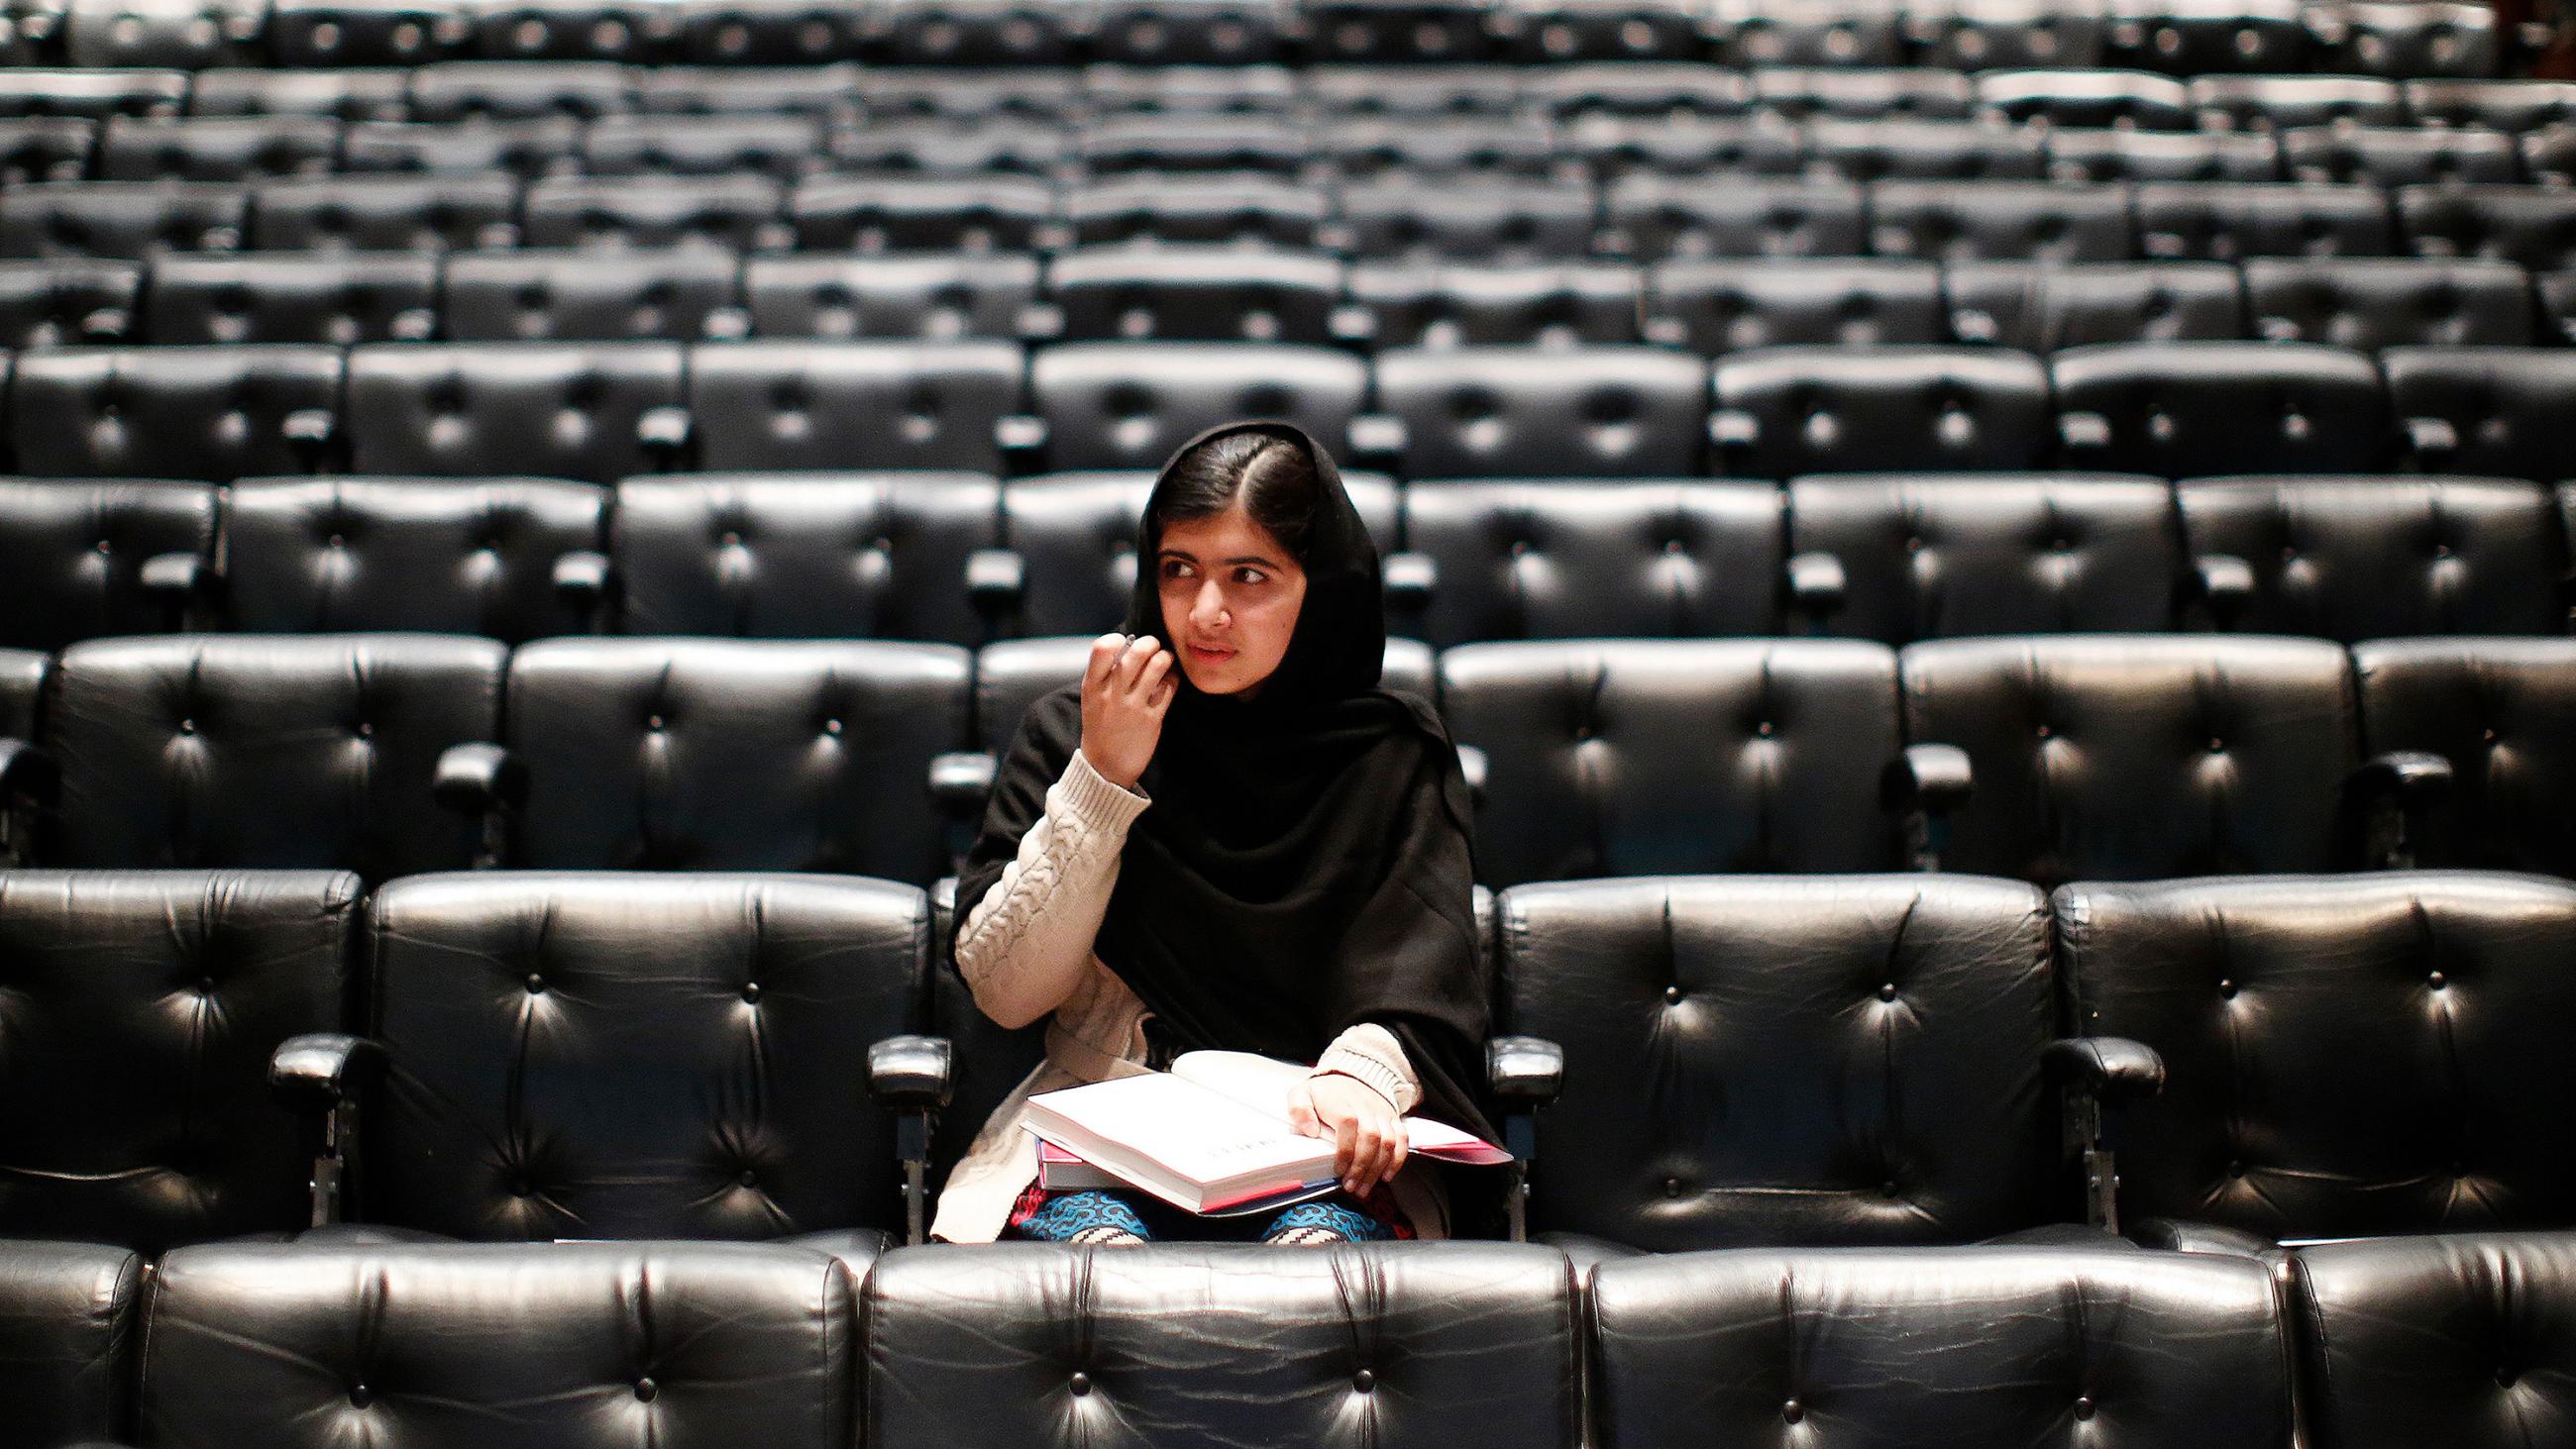 The photo shows Malala in an empty auditorium seated where the audience will sit to listen to her. 